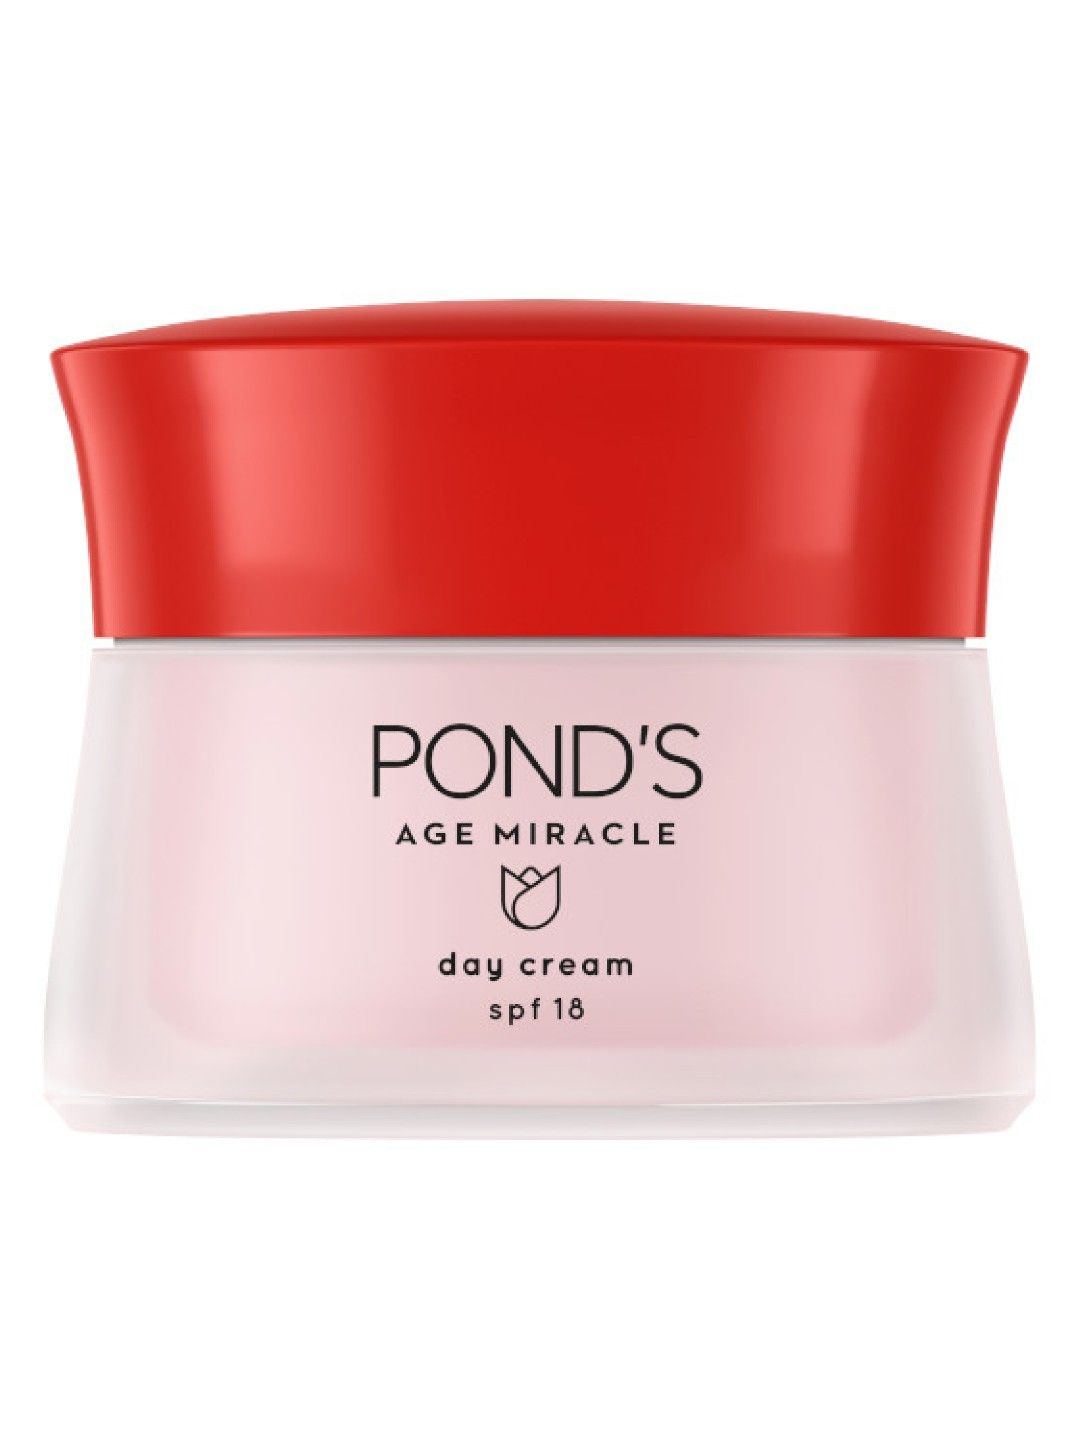 Pond's Age Miracle Day Cream (10g)